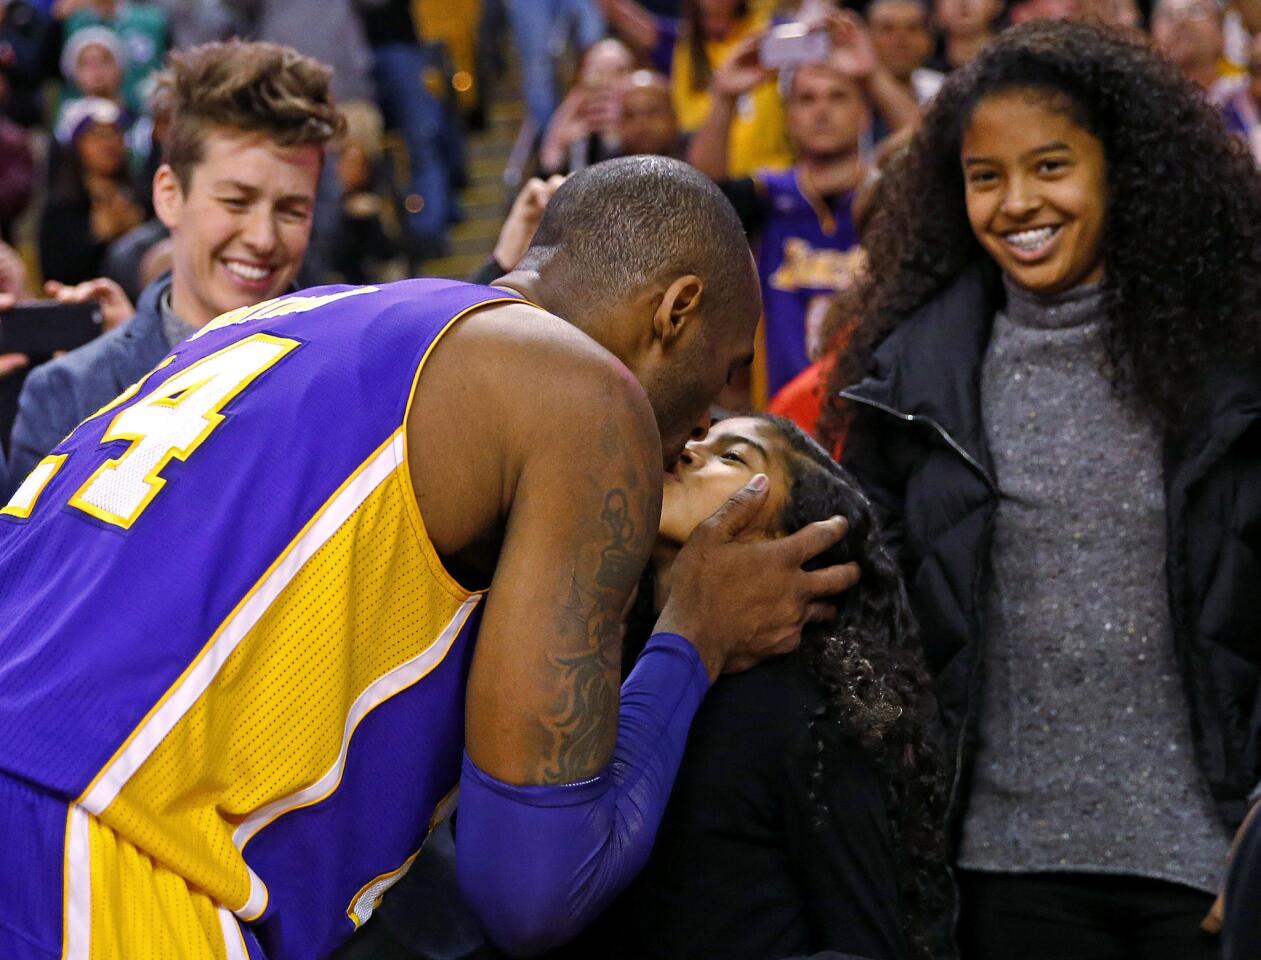 Los Angeles Lakers' Kobe Bryant kisses his daughter Gianna as his other daughter, Natalia, watches after Bryant played his last regular season game in Boston, a 112-104 win over the Boston Celtics in an NBA basketball game in Boston Wednesday, Dec. 30, 2015. (AP Photo/Winslow Townson)